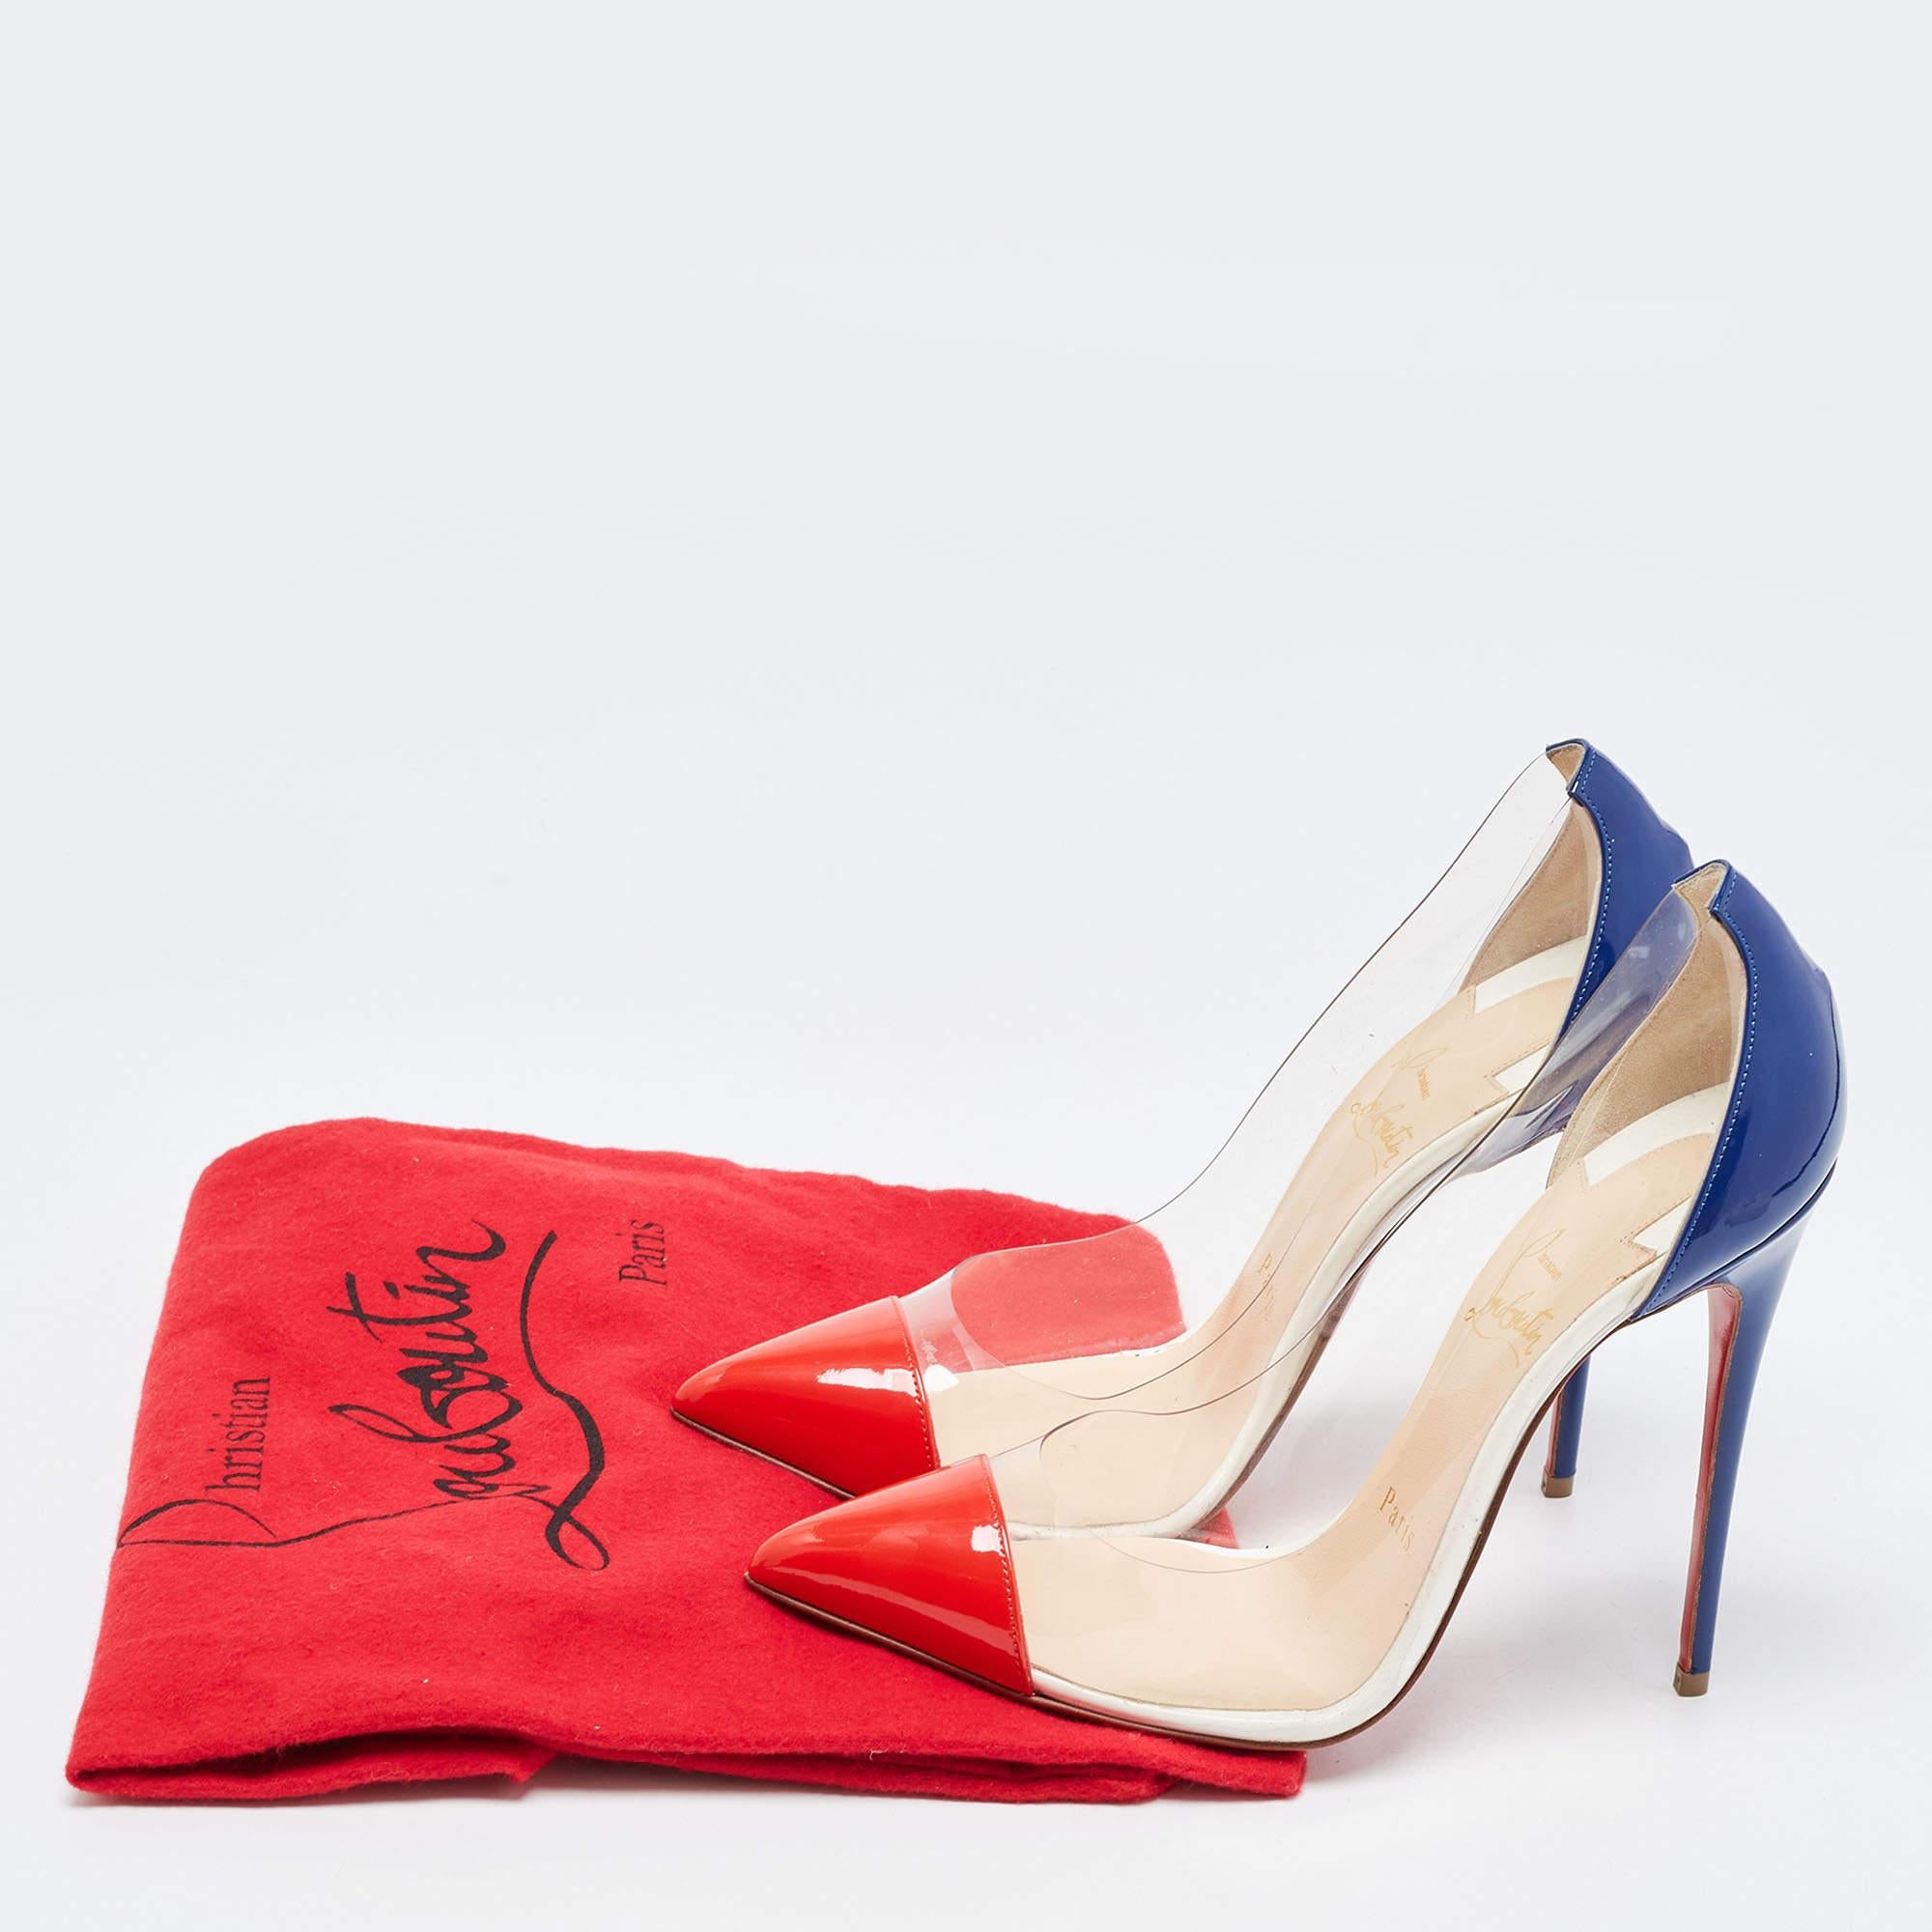 Christian Louboutin Red/Blue Patent Leather and PVC Debout Pumps Size 37 3